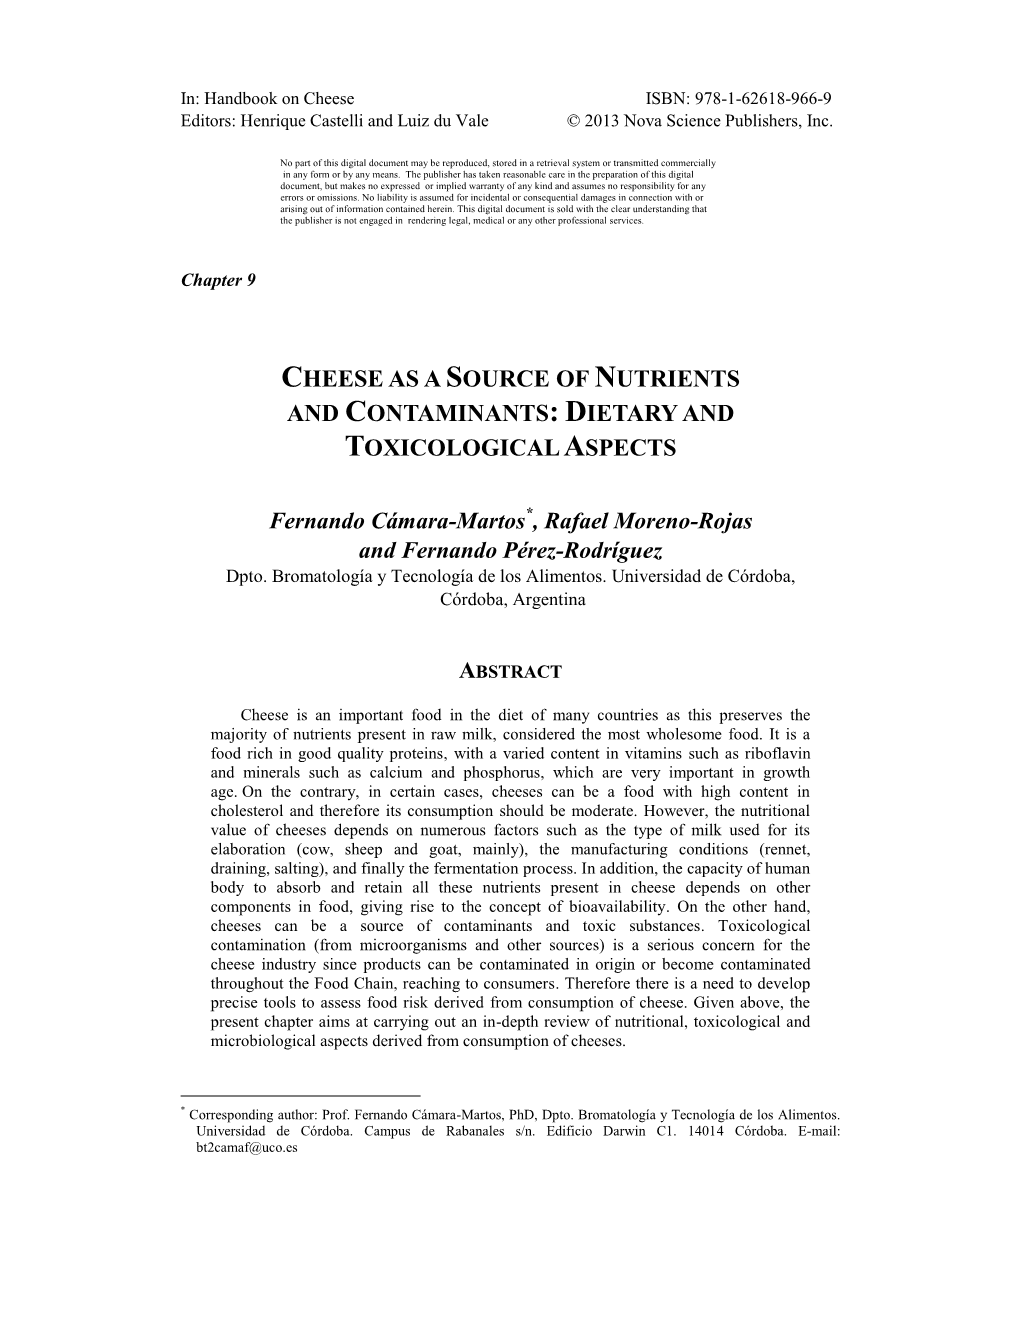 Cheese As a Source of Nutrients and Contaminants: Dietary and Toxicological Aspects